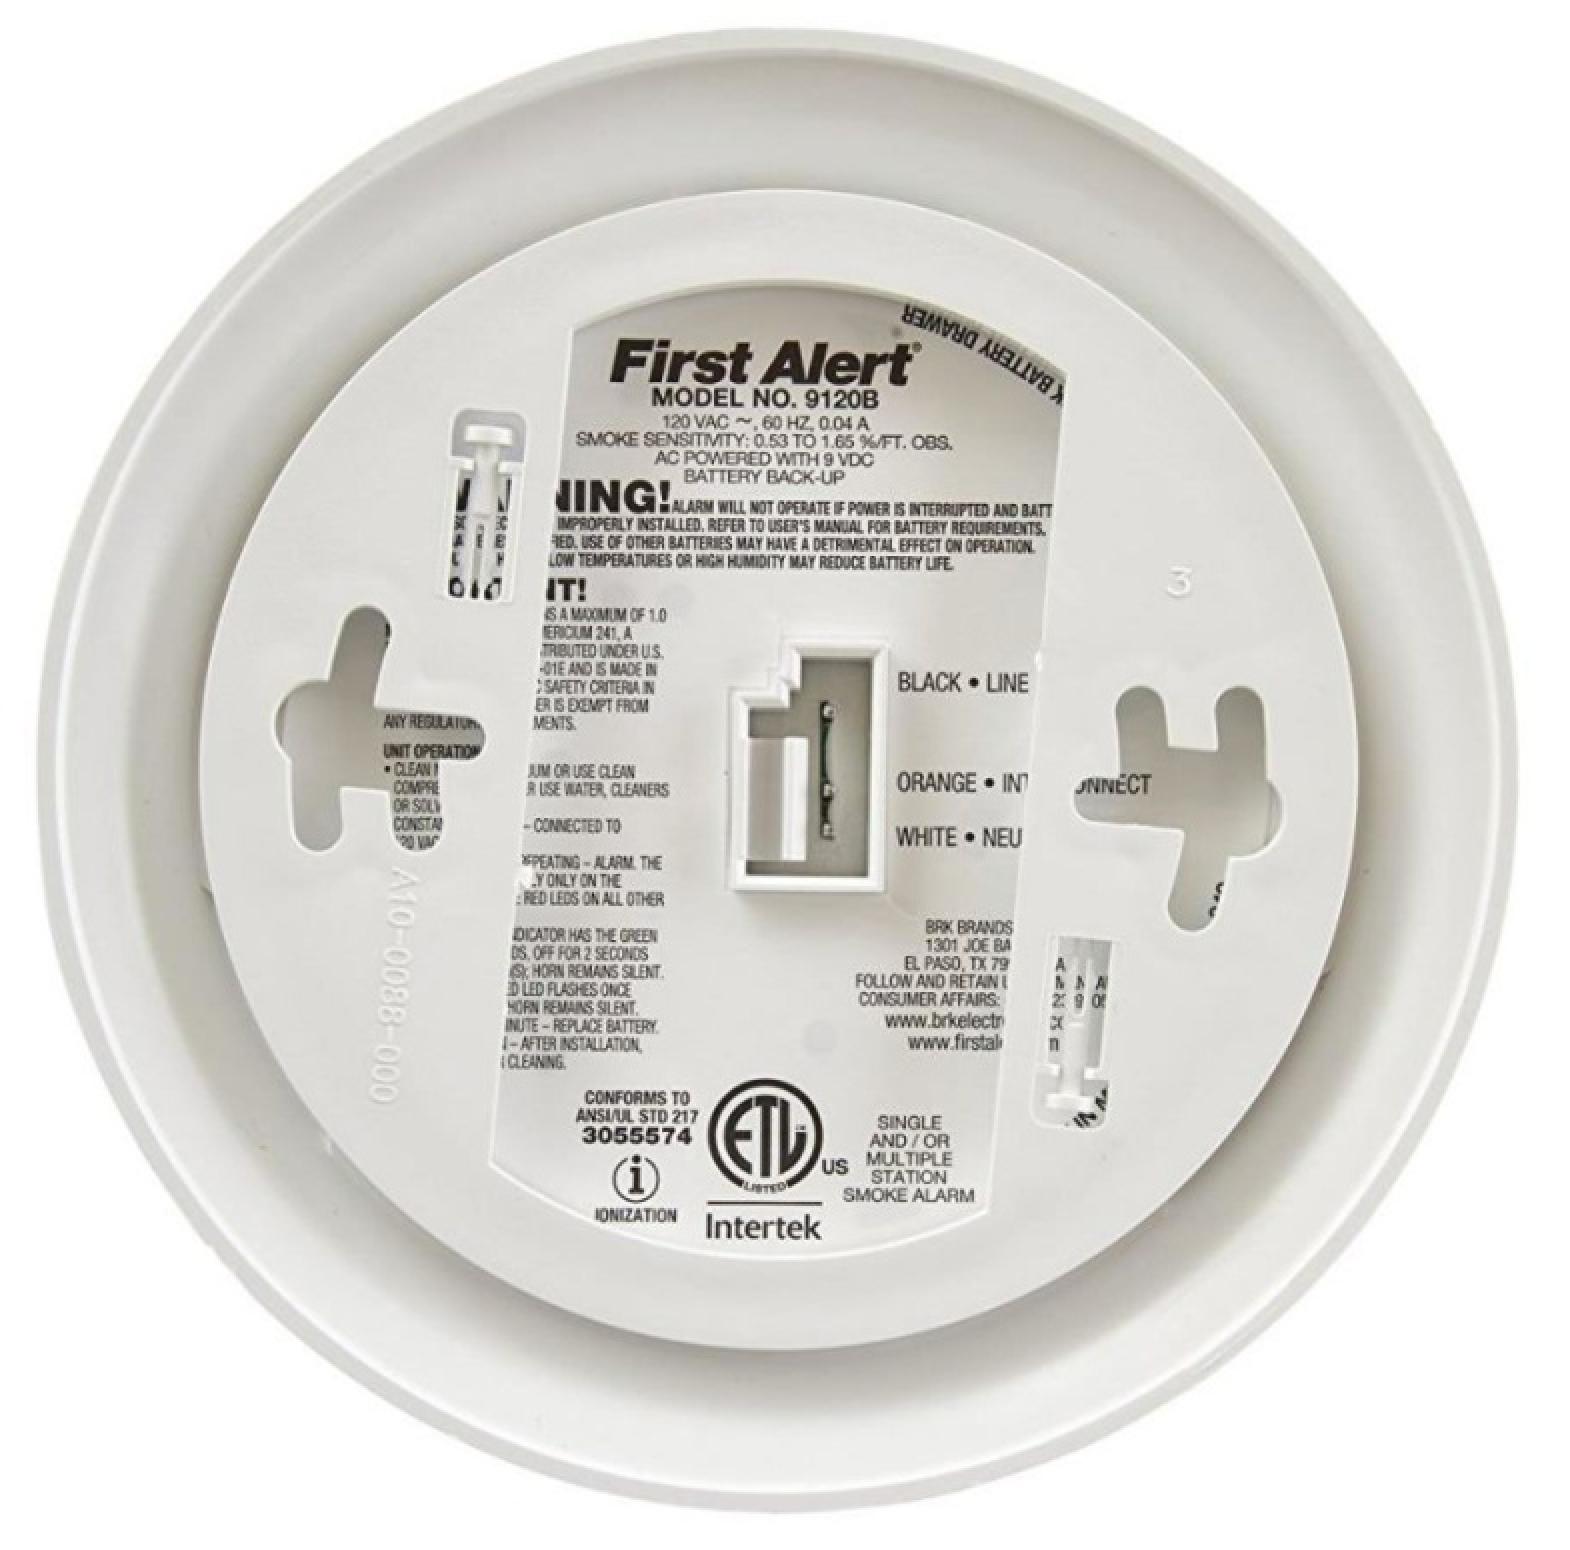 First Alert Hardwired Smoke Alarm with Battery Backup